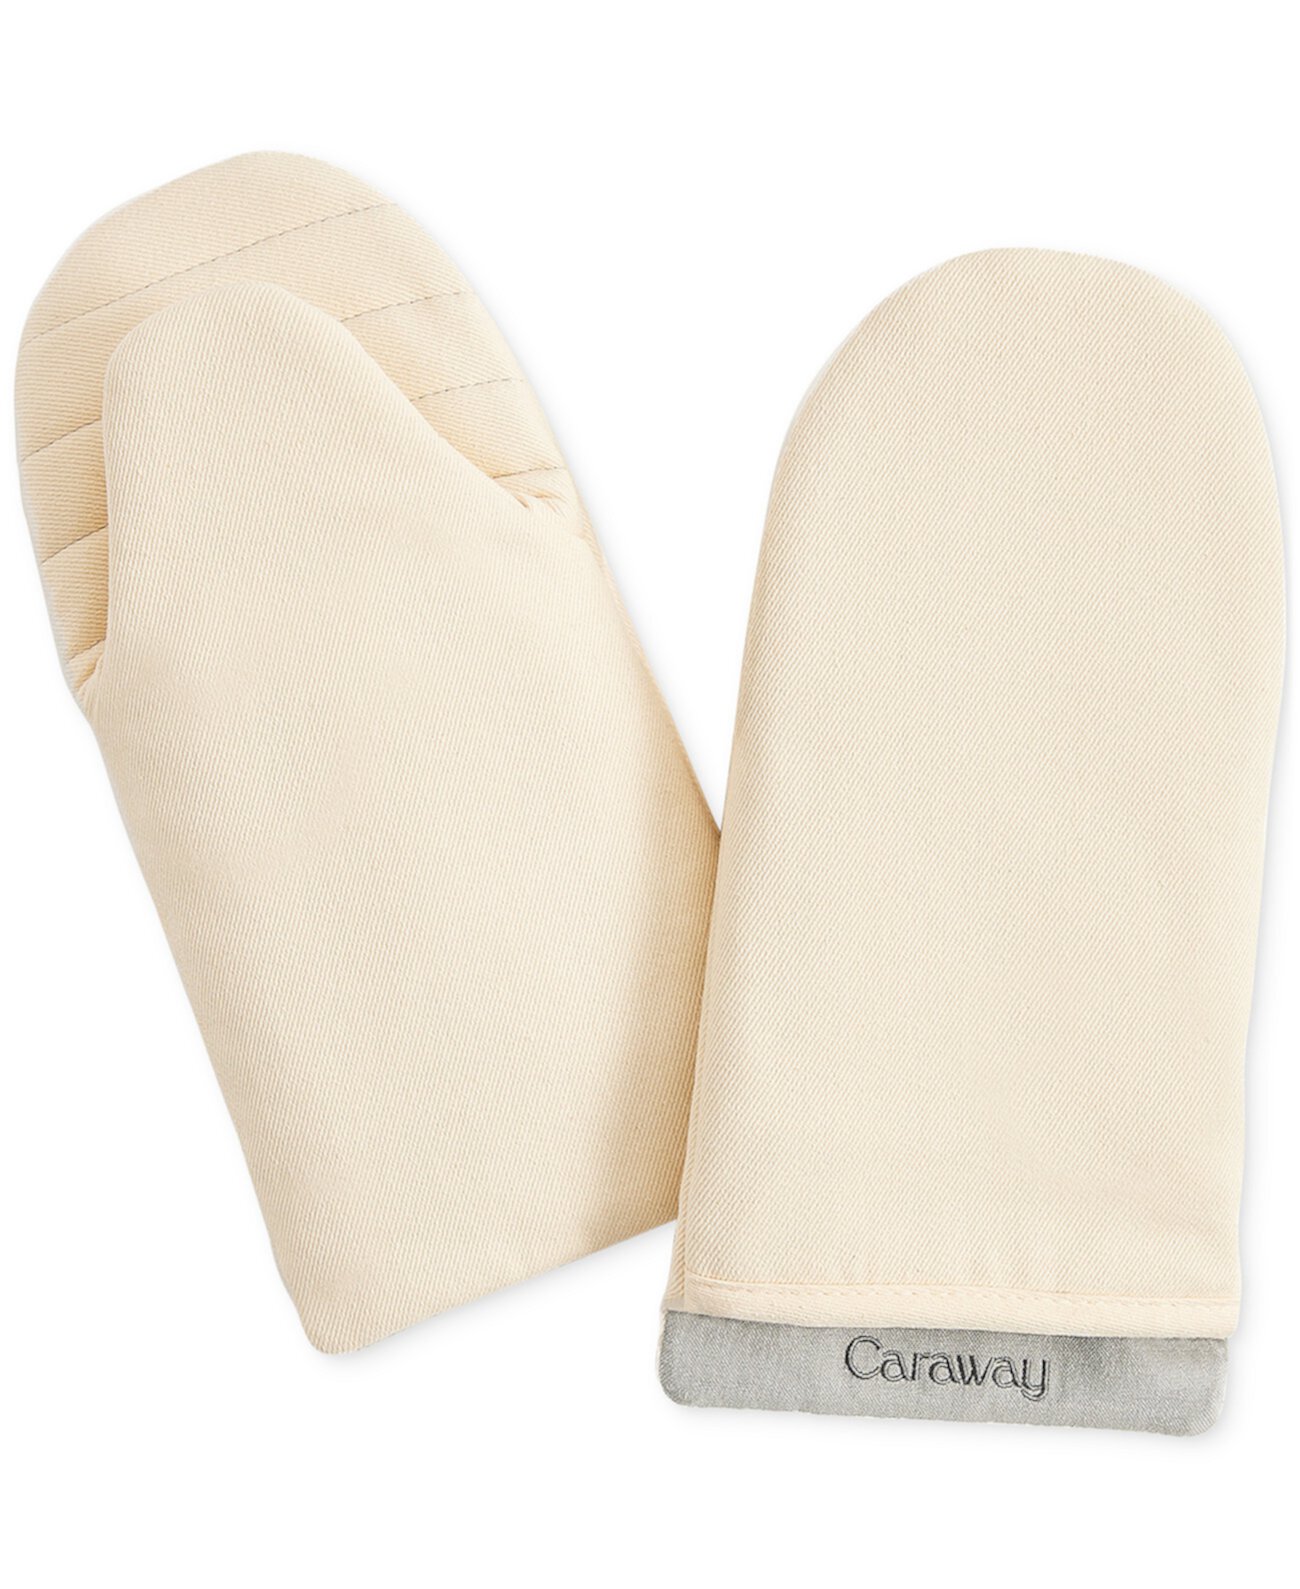 2-Pc. Cotton Double-Layered Oven Mitt Set Caraway